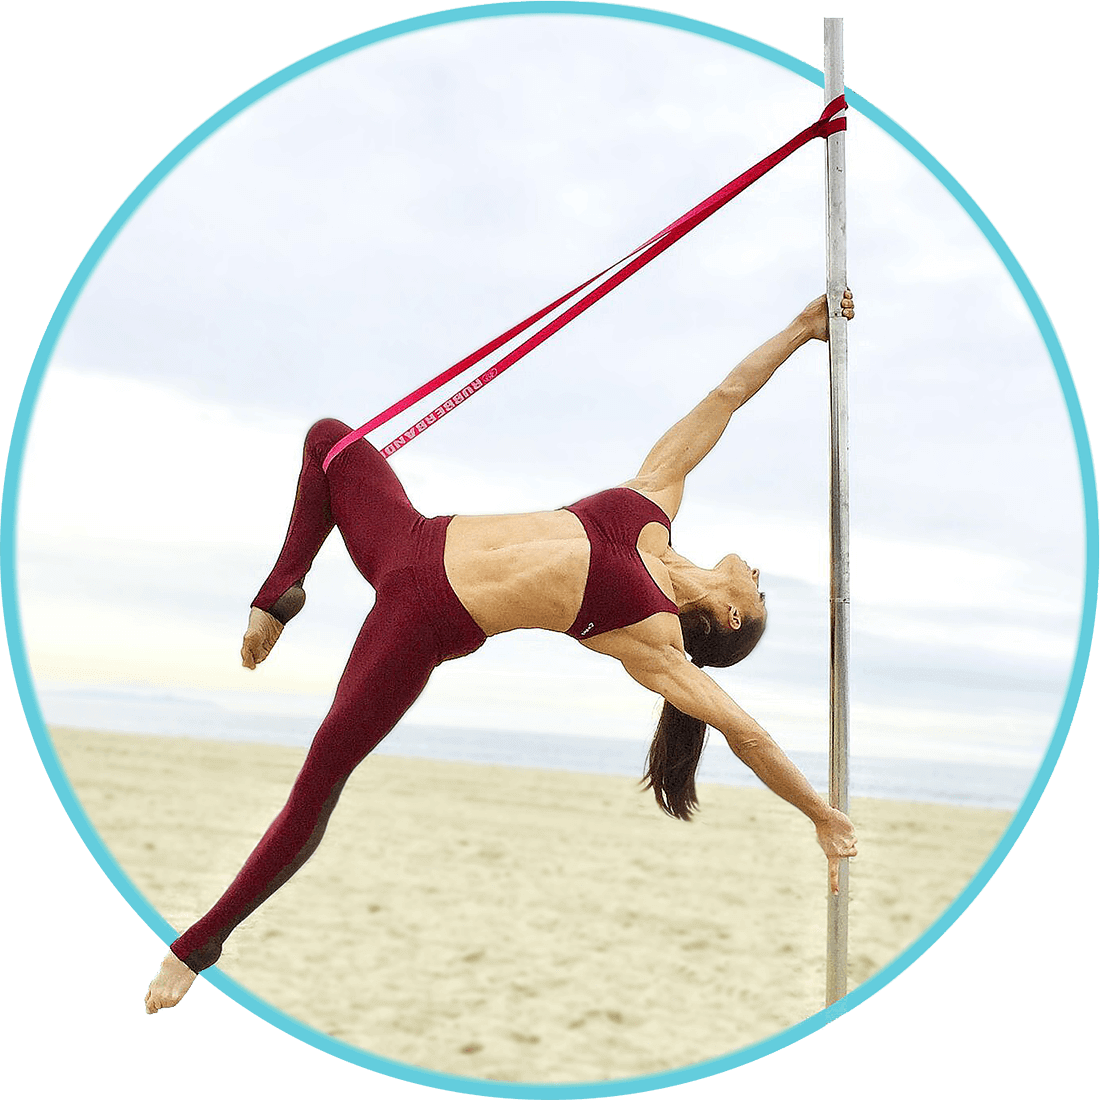 Handspring on the Pole with Resistance Bands